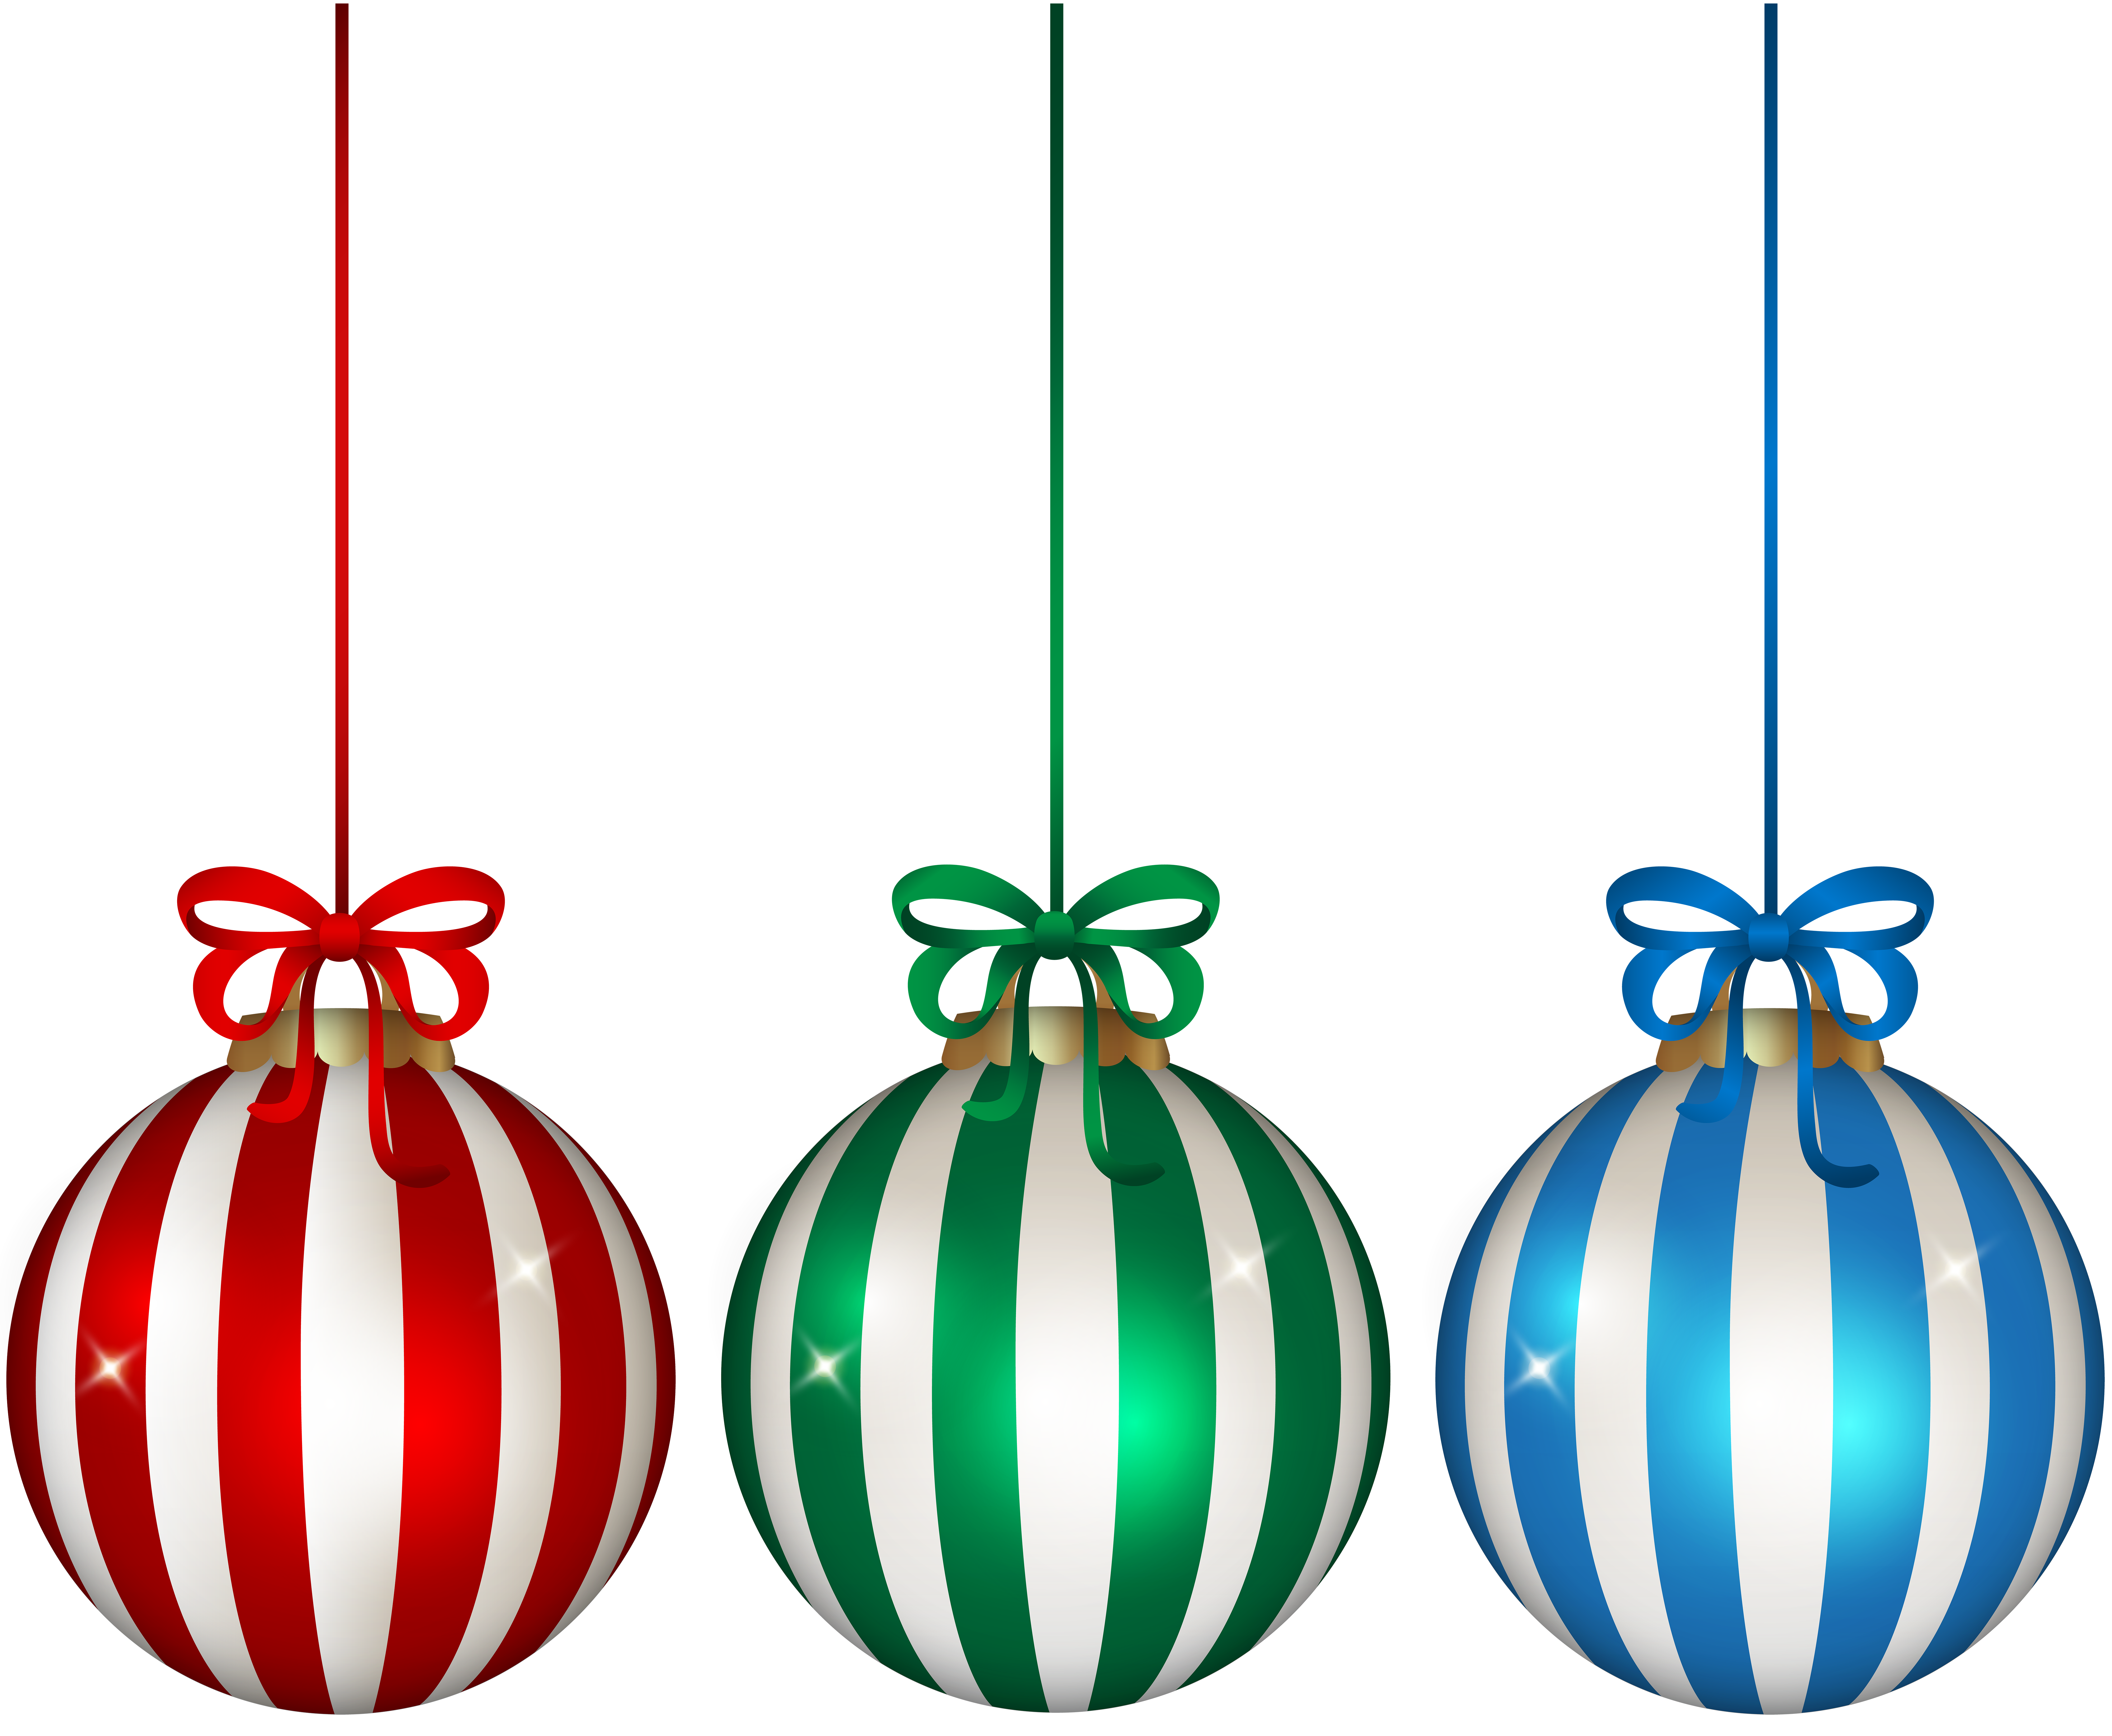 Free Christmas Ornament Clipart Pictures - Clipartix - White Christmas Ornament Clip Art